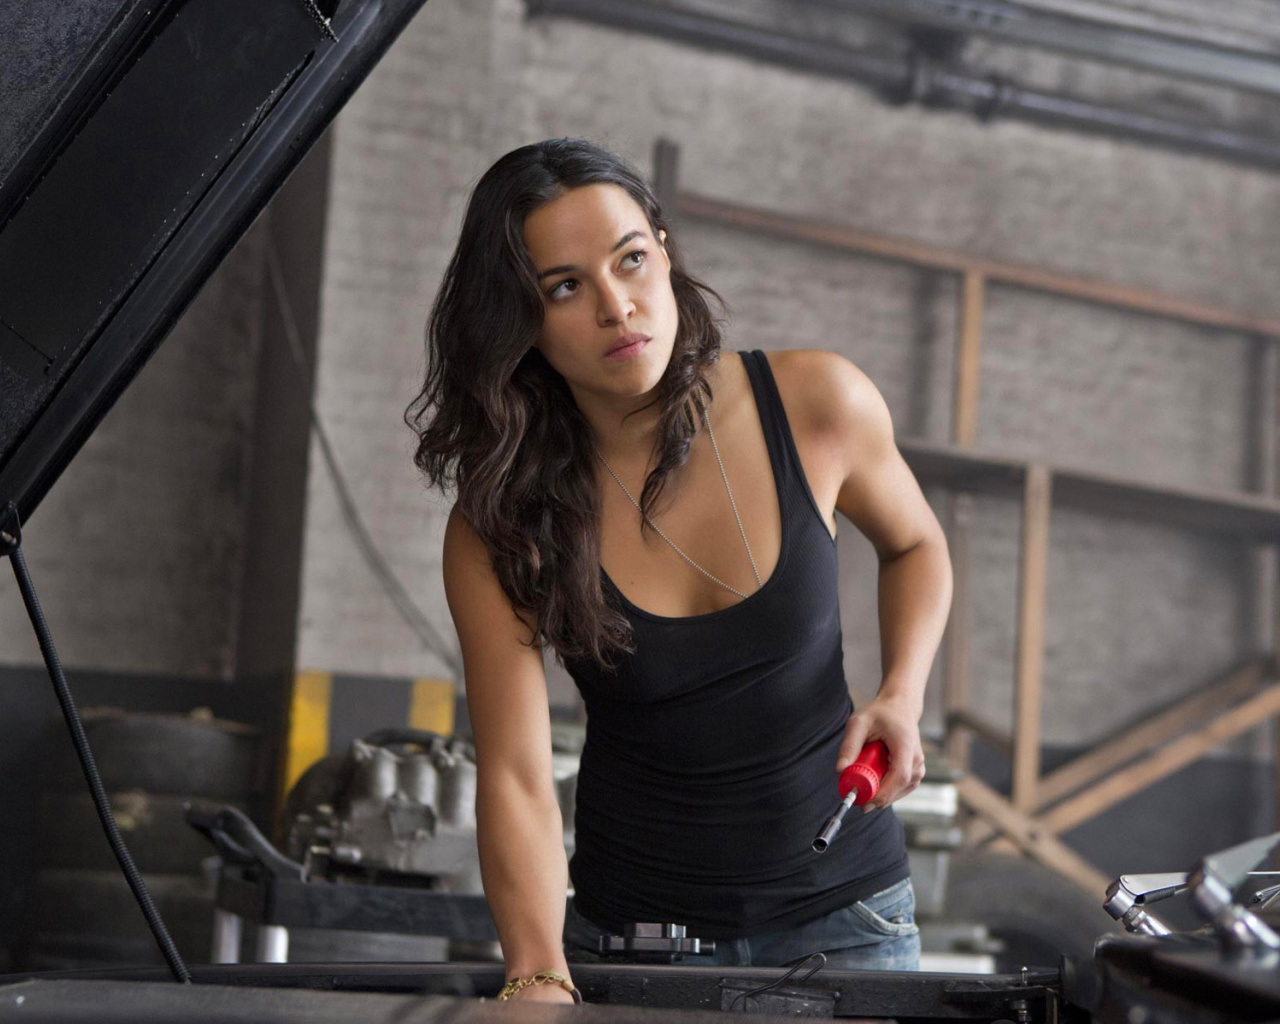 Fast and Furious 6 Letty Ortiz wallpaper 1280x1024